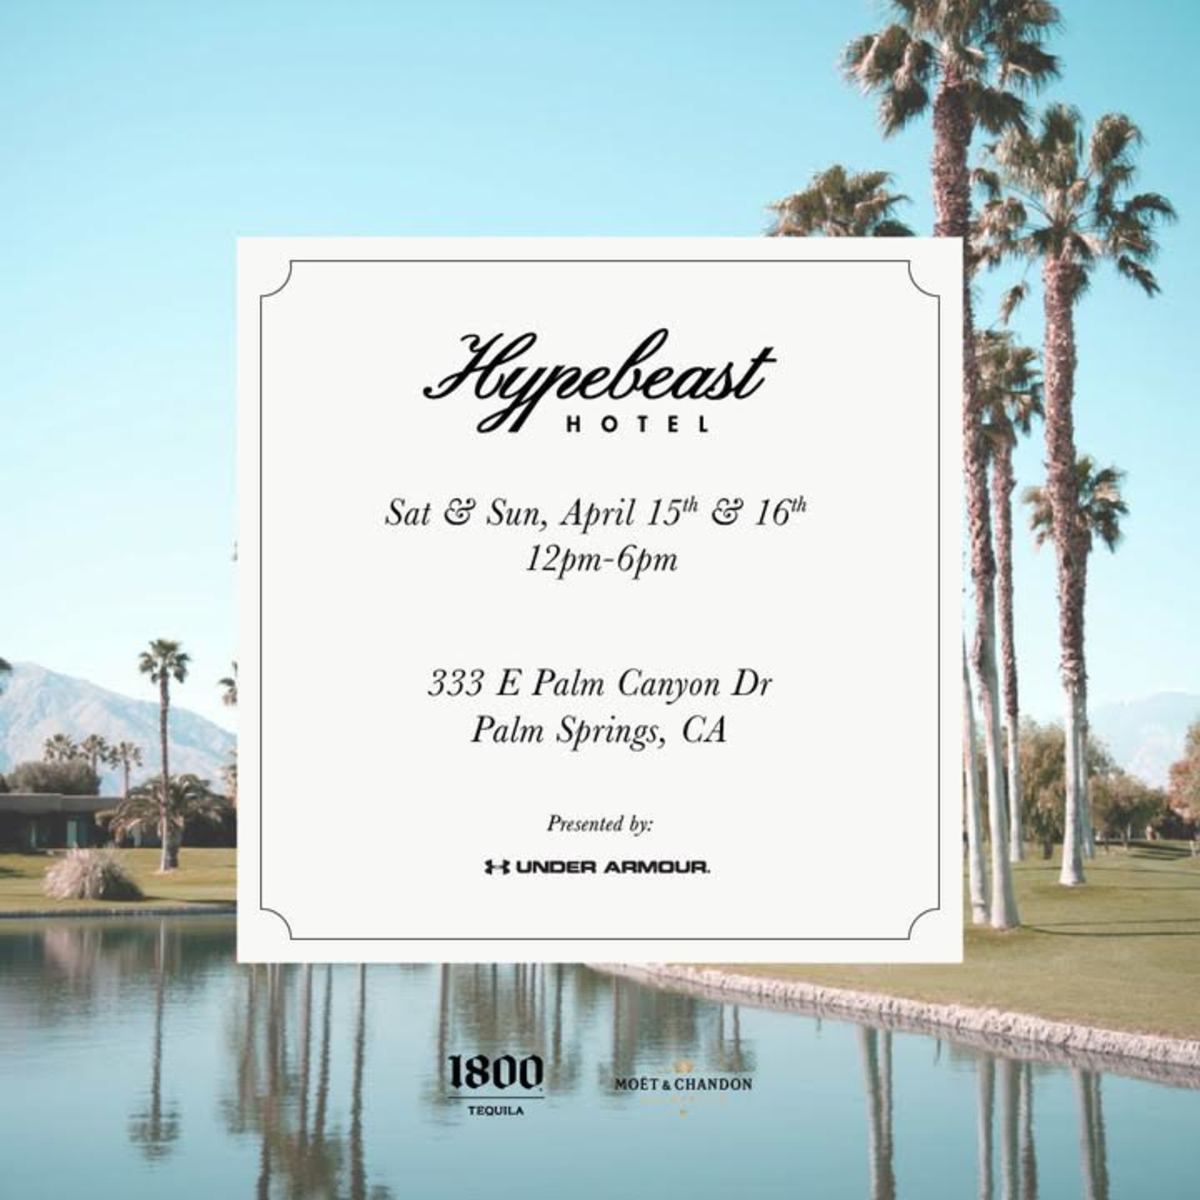 With a 12:00 pm check-in time at the HYPEBEAST hotel, it won't be hard to start your weekend off right!